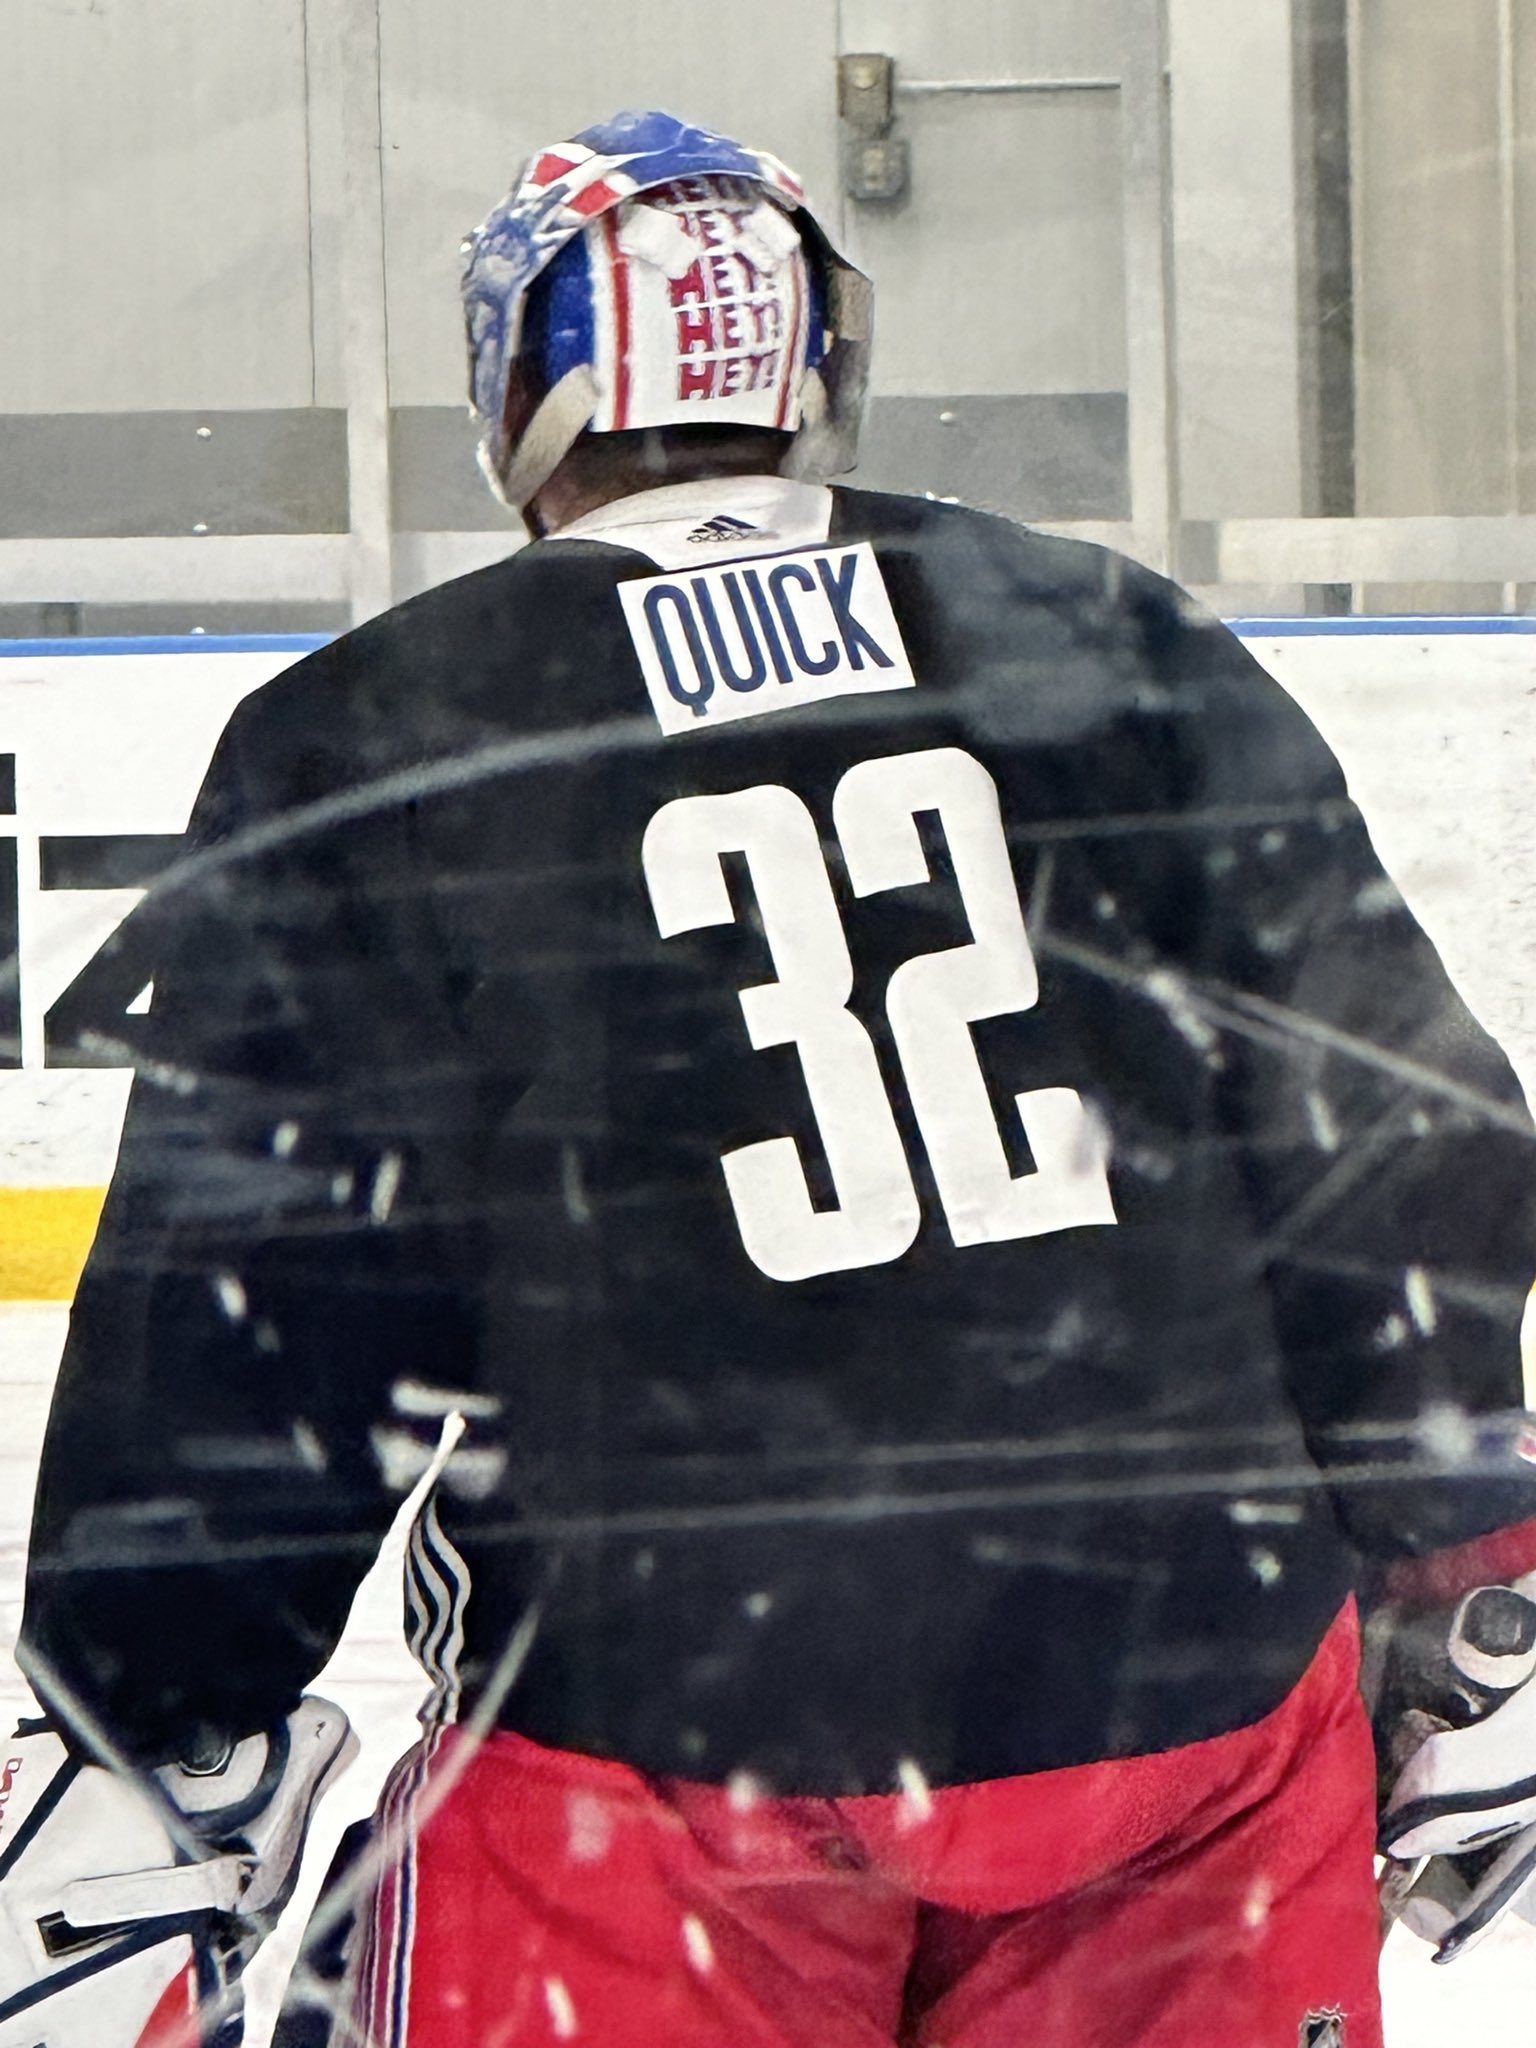 Jonny Lazarus] “Jonathan Quick with a pretty unique 'Hey! Hey! Hey! Hey!  Hey!' on the back of his bucket.” : r/rangers